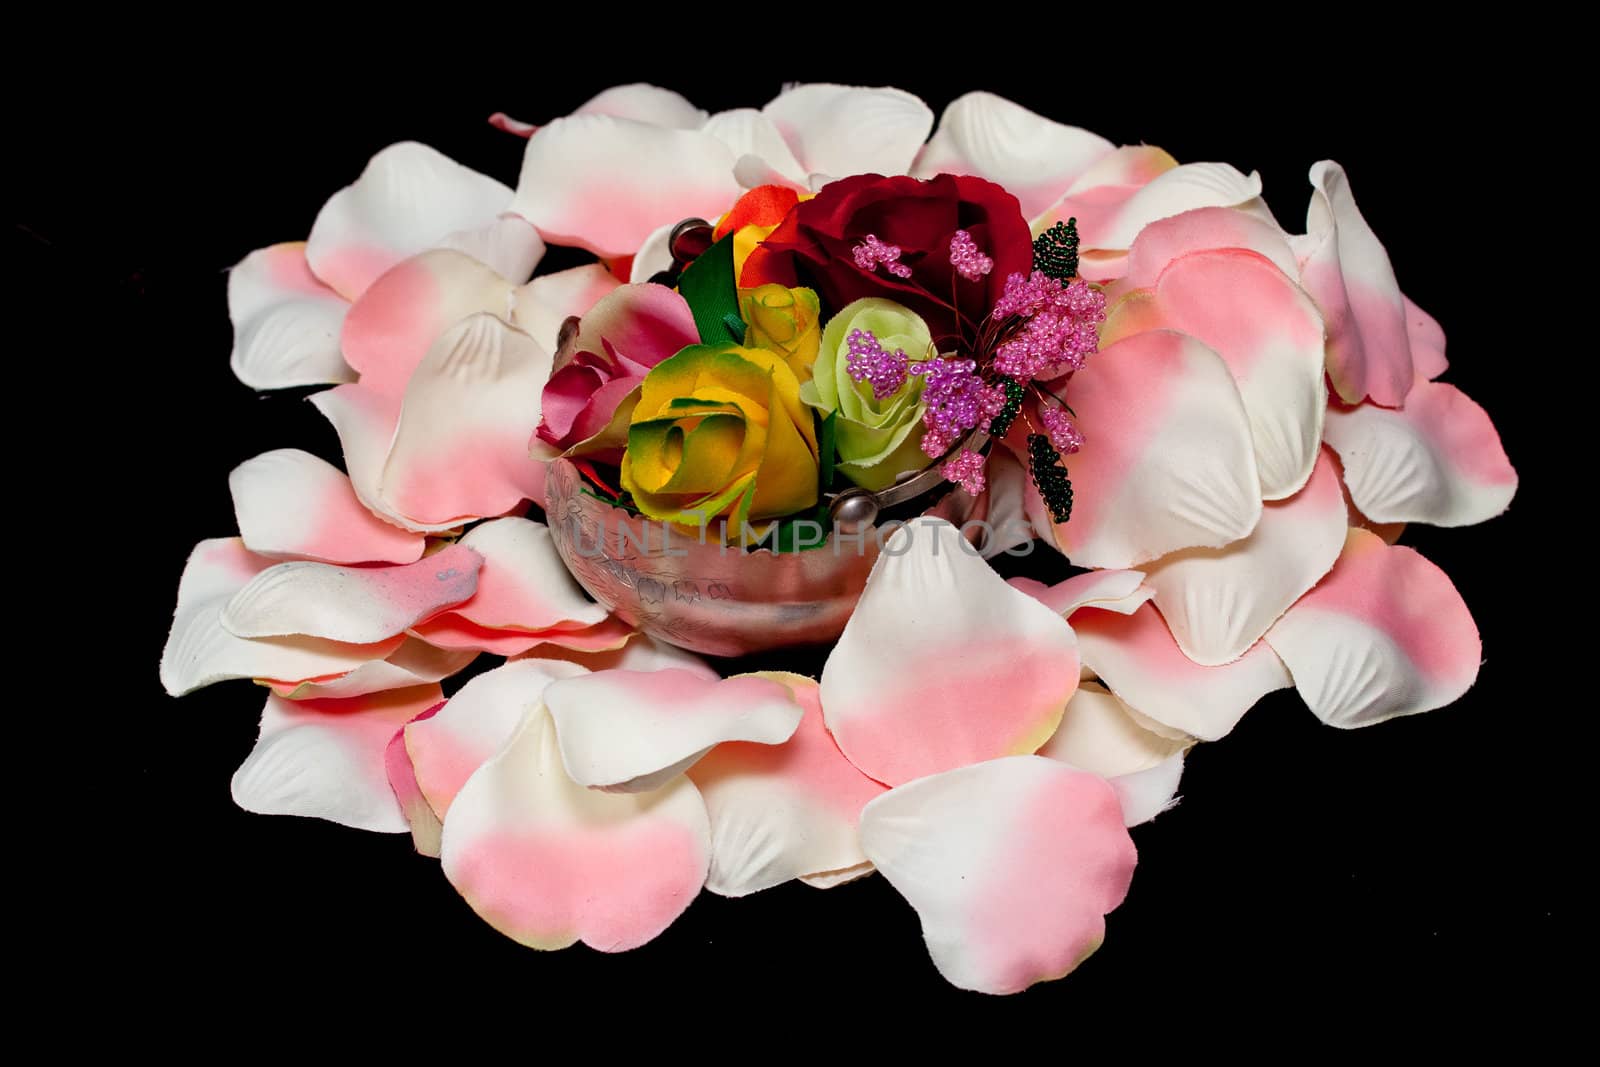 Silver basket with roses on rose textile petals by foaloce